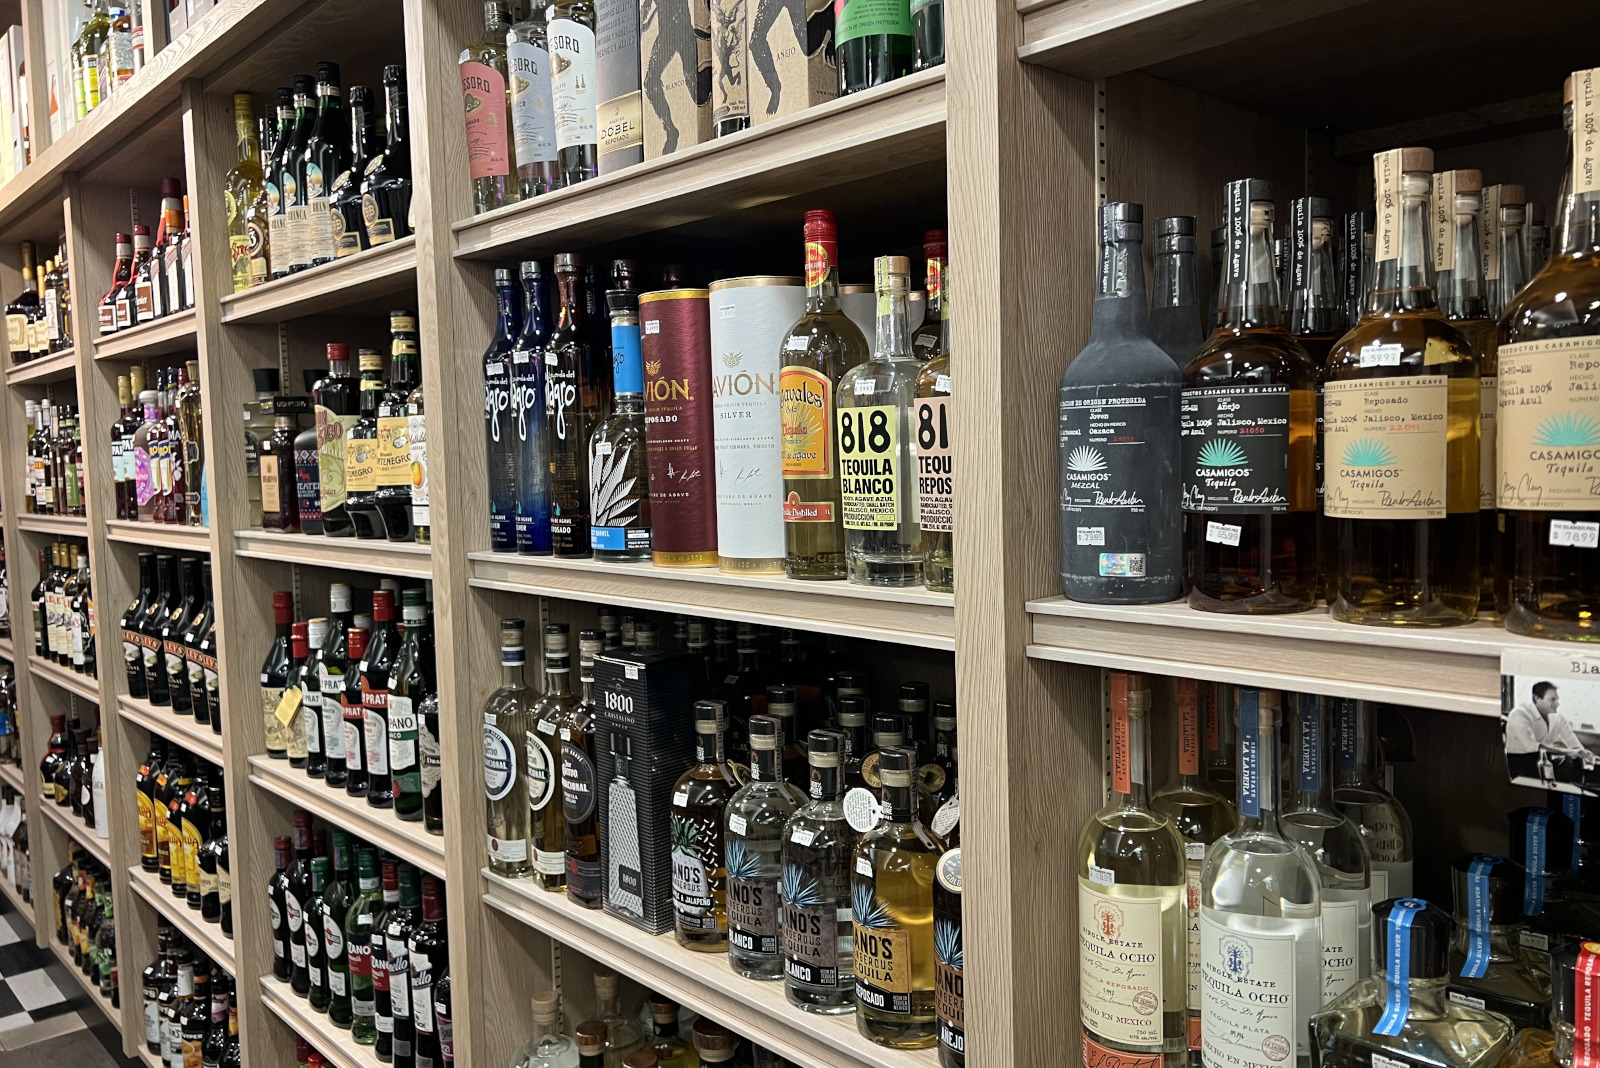 Shelves of specialty spirits in a liquor store